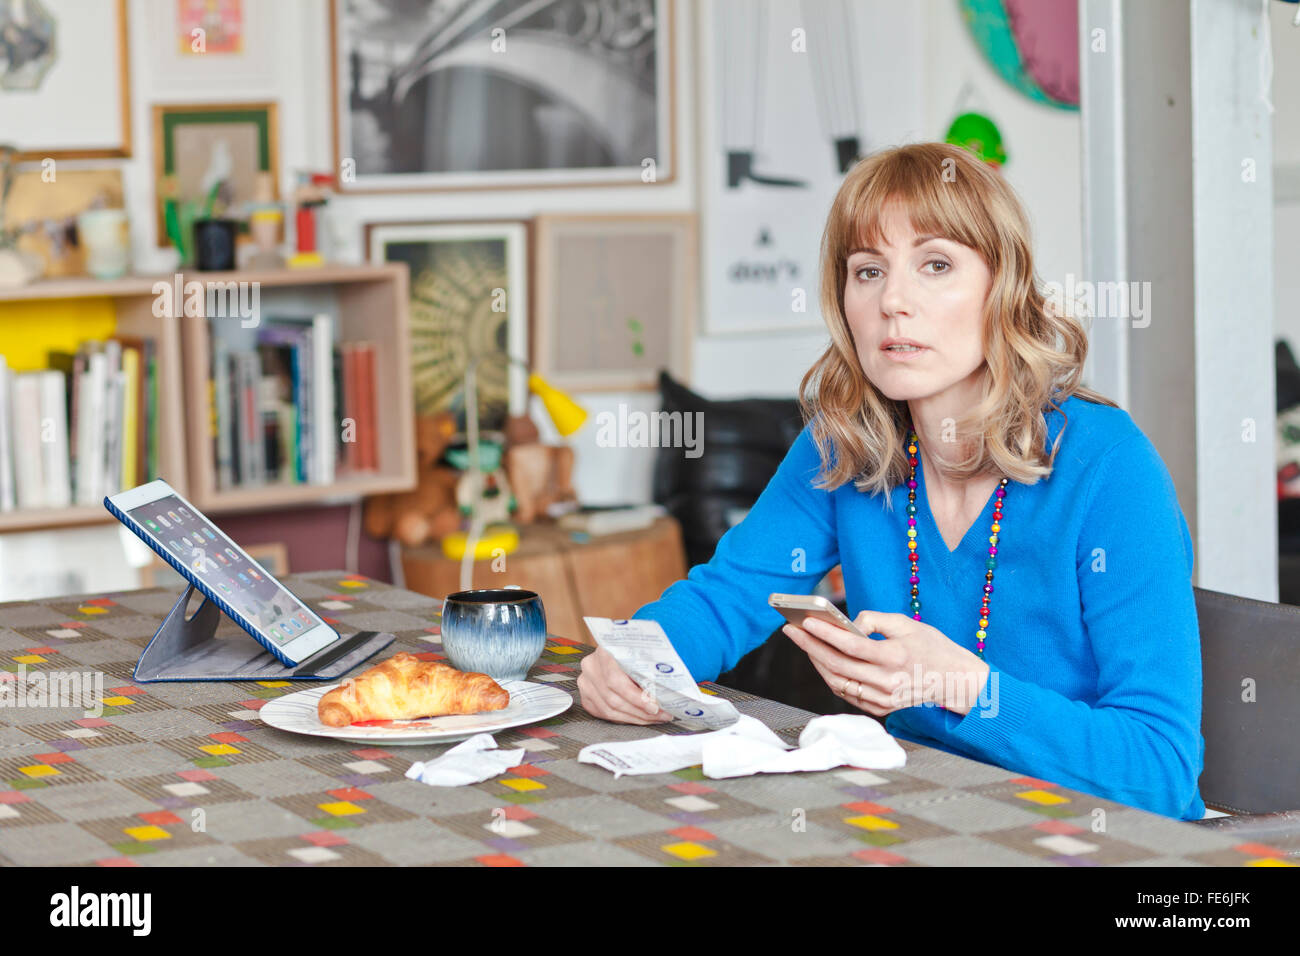 Woman checks the receipts and looks confused at a living room table. Stock Photo